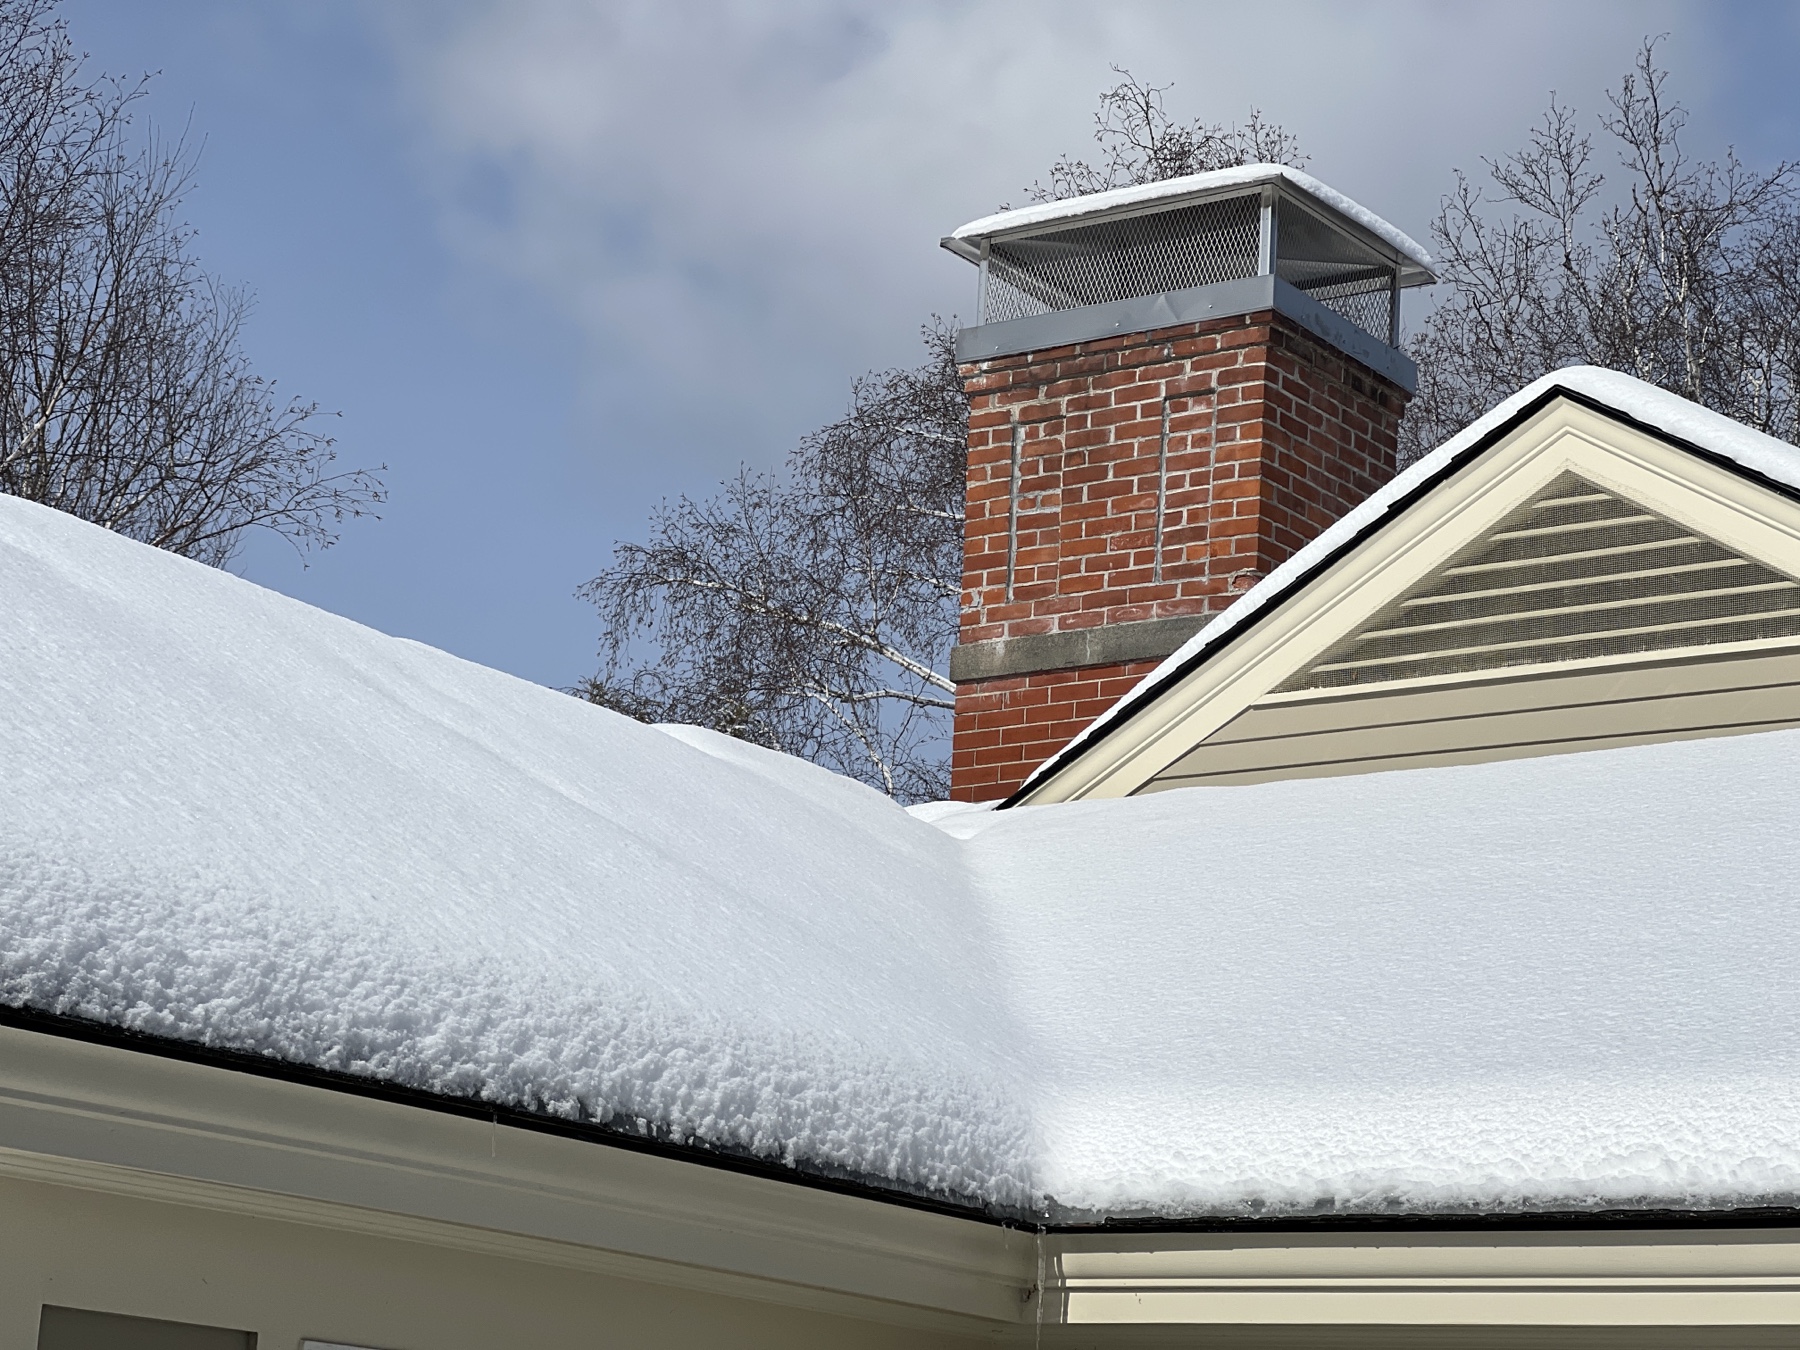 close-up of snow on the roof of a house